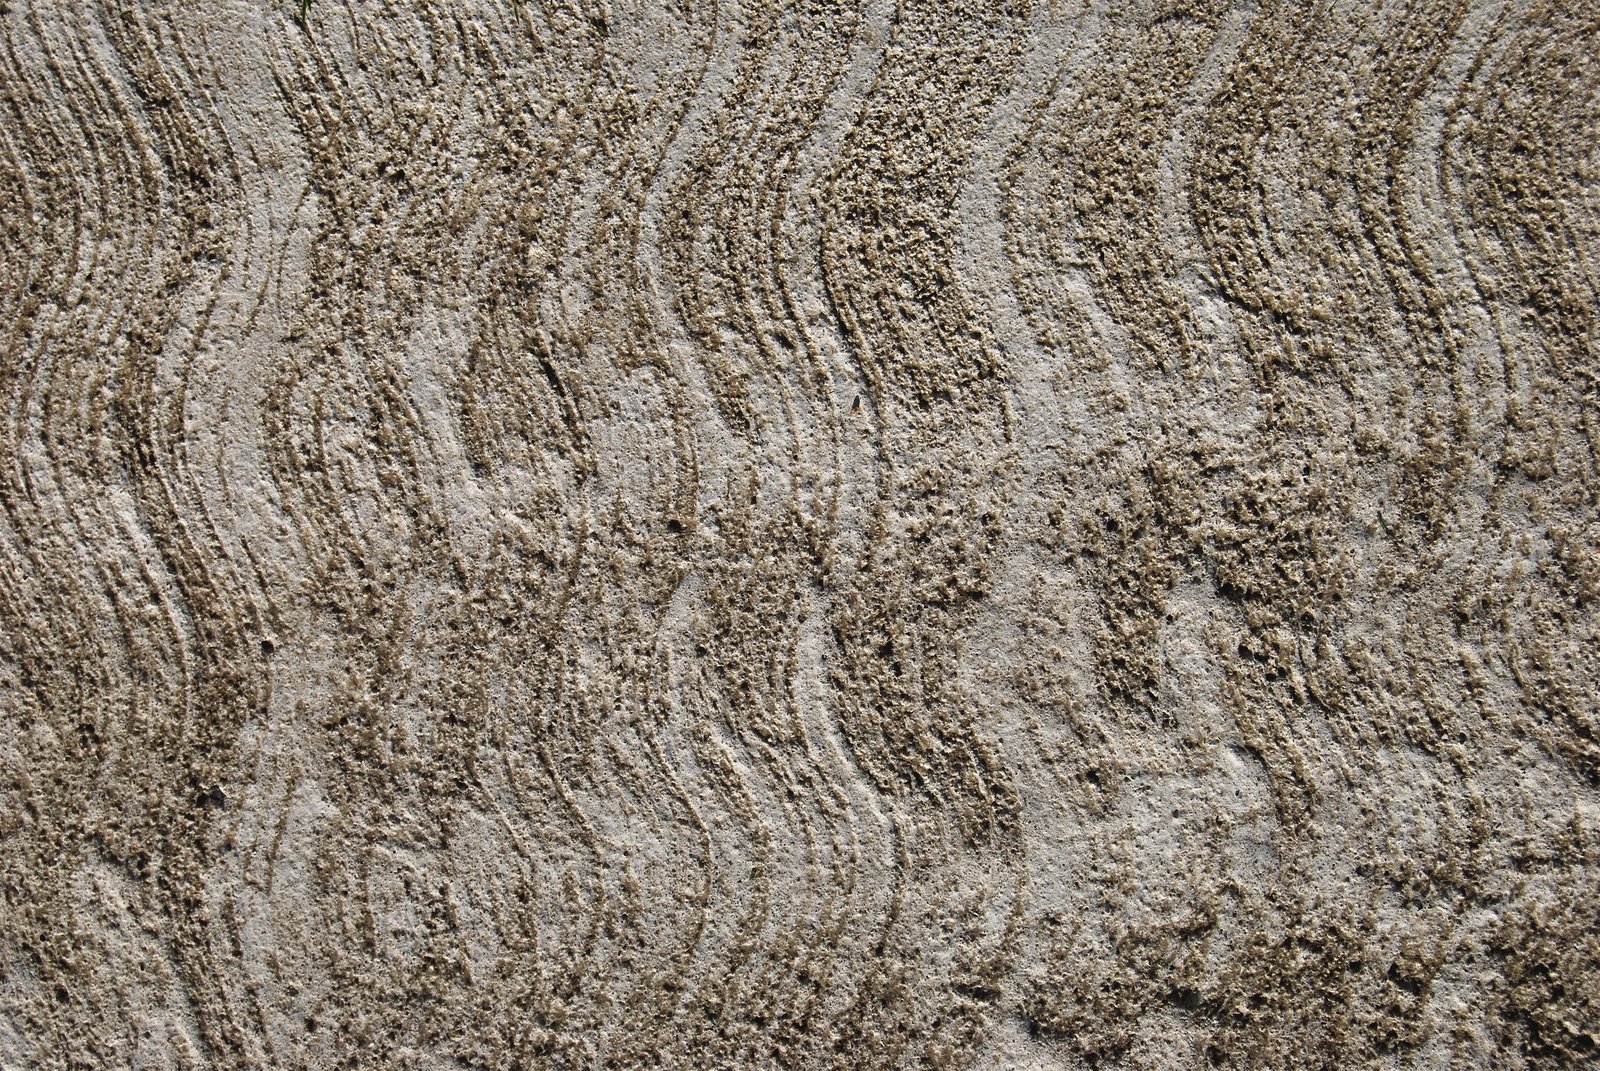 an up close view of an artistic looking, natural pattern